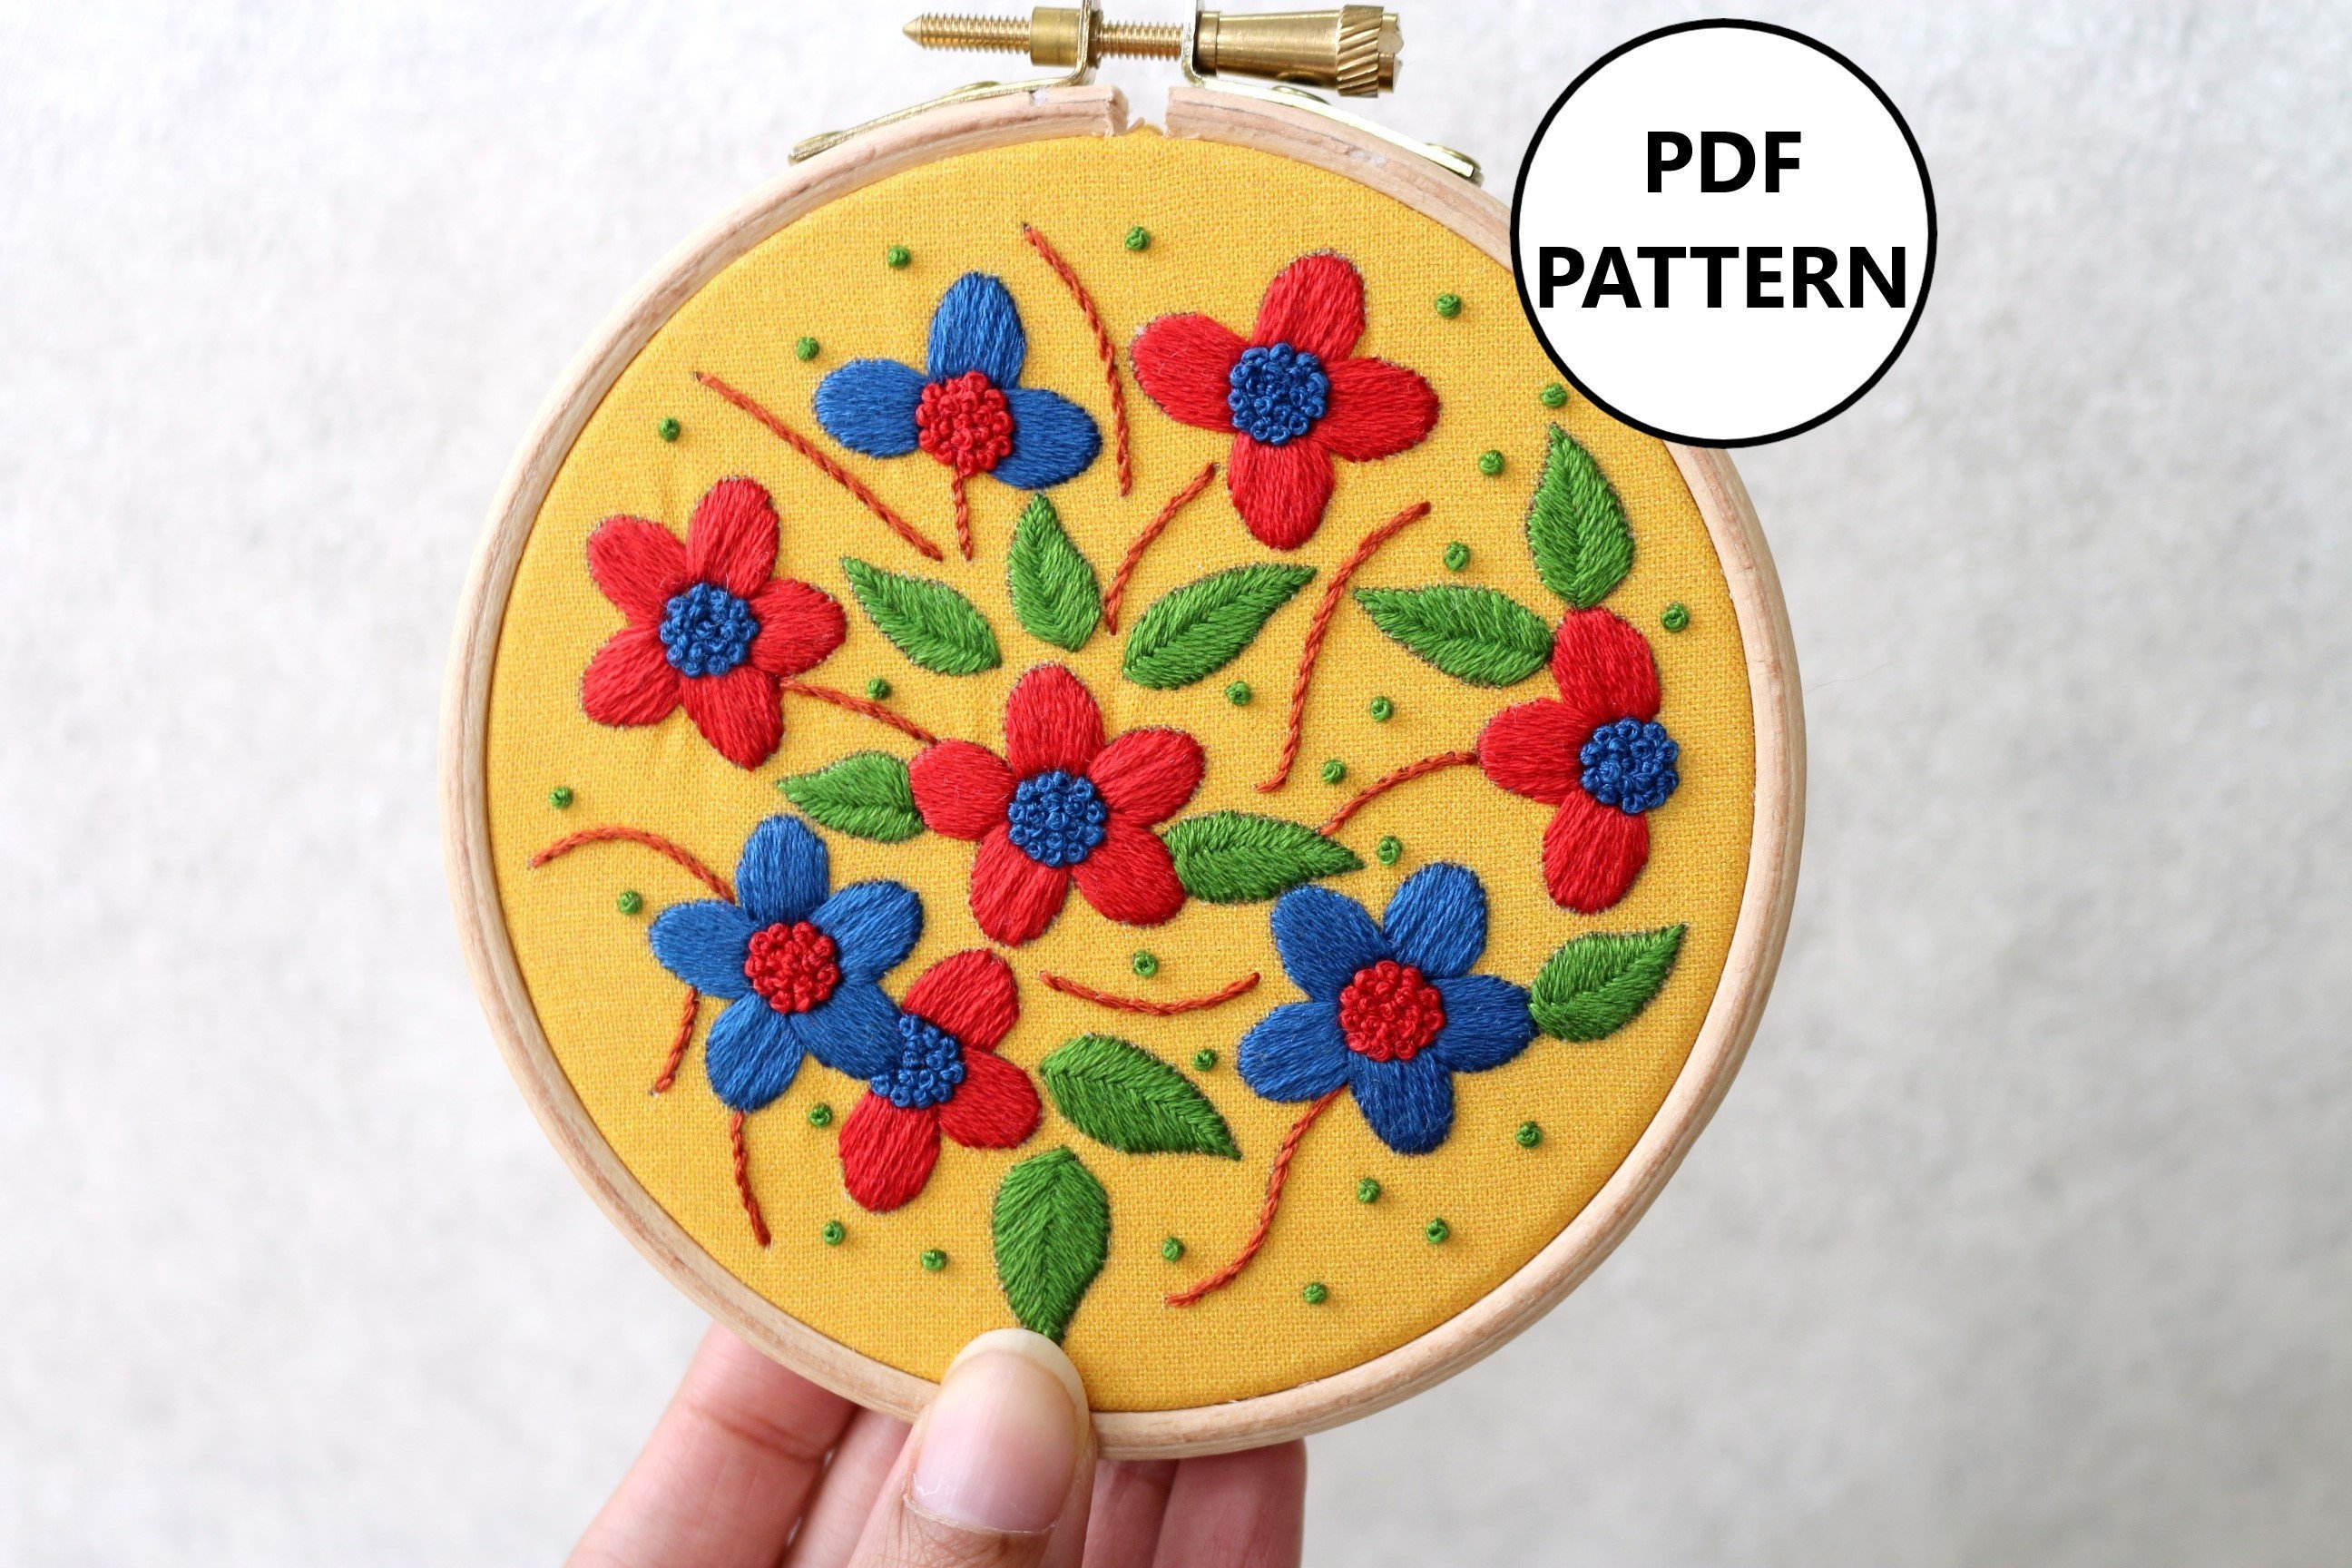 How To Make Your Own Embroidery Pattern Floral Embroidery Pattern Pdf Embroidery Pattern Embroidery Pattern Beginner Digital Download Floral Hoop Art Embroidery Flowers Diy